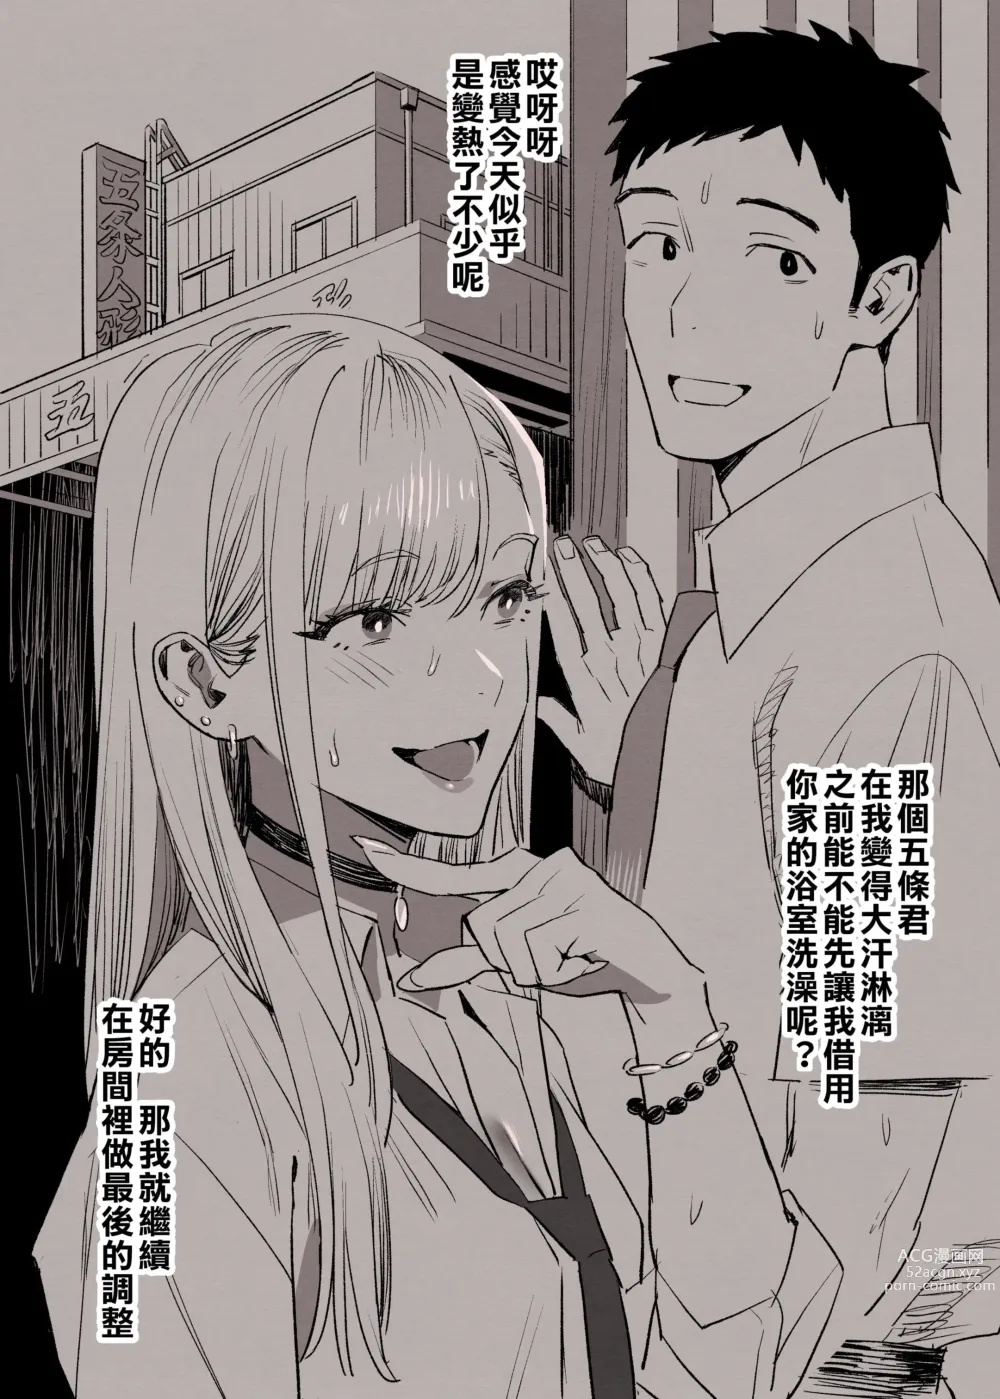 Page 1 of doujinshi Dressing in love part 2